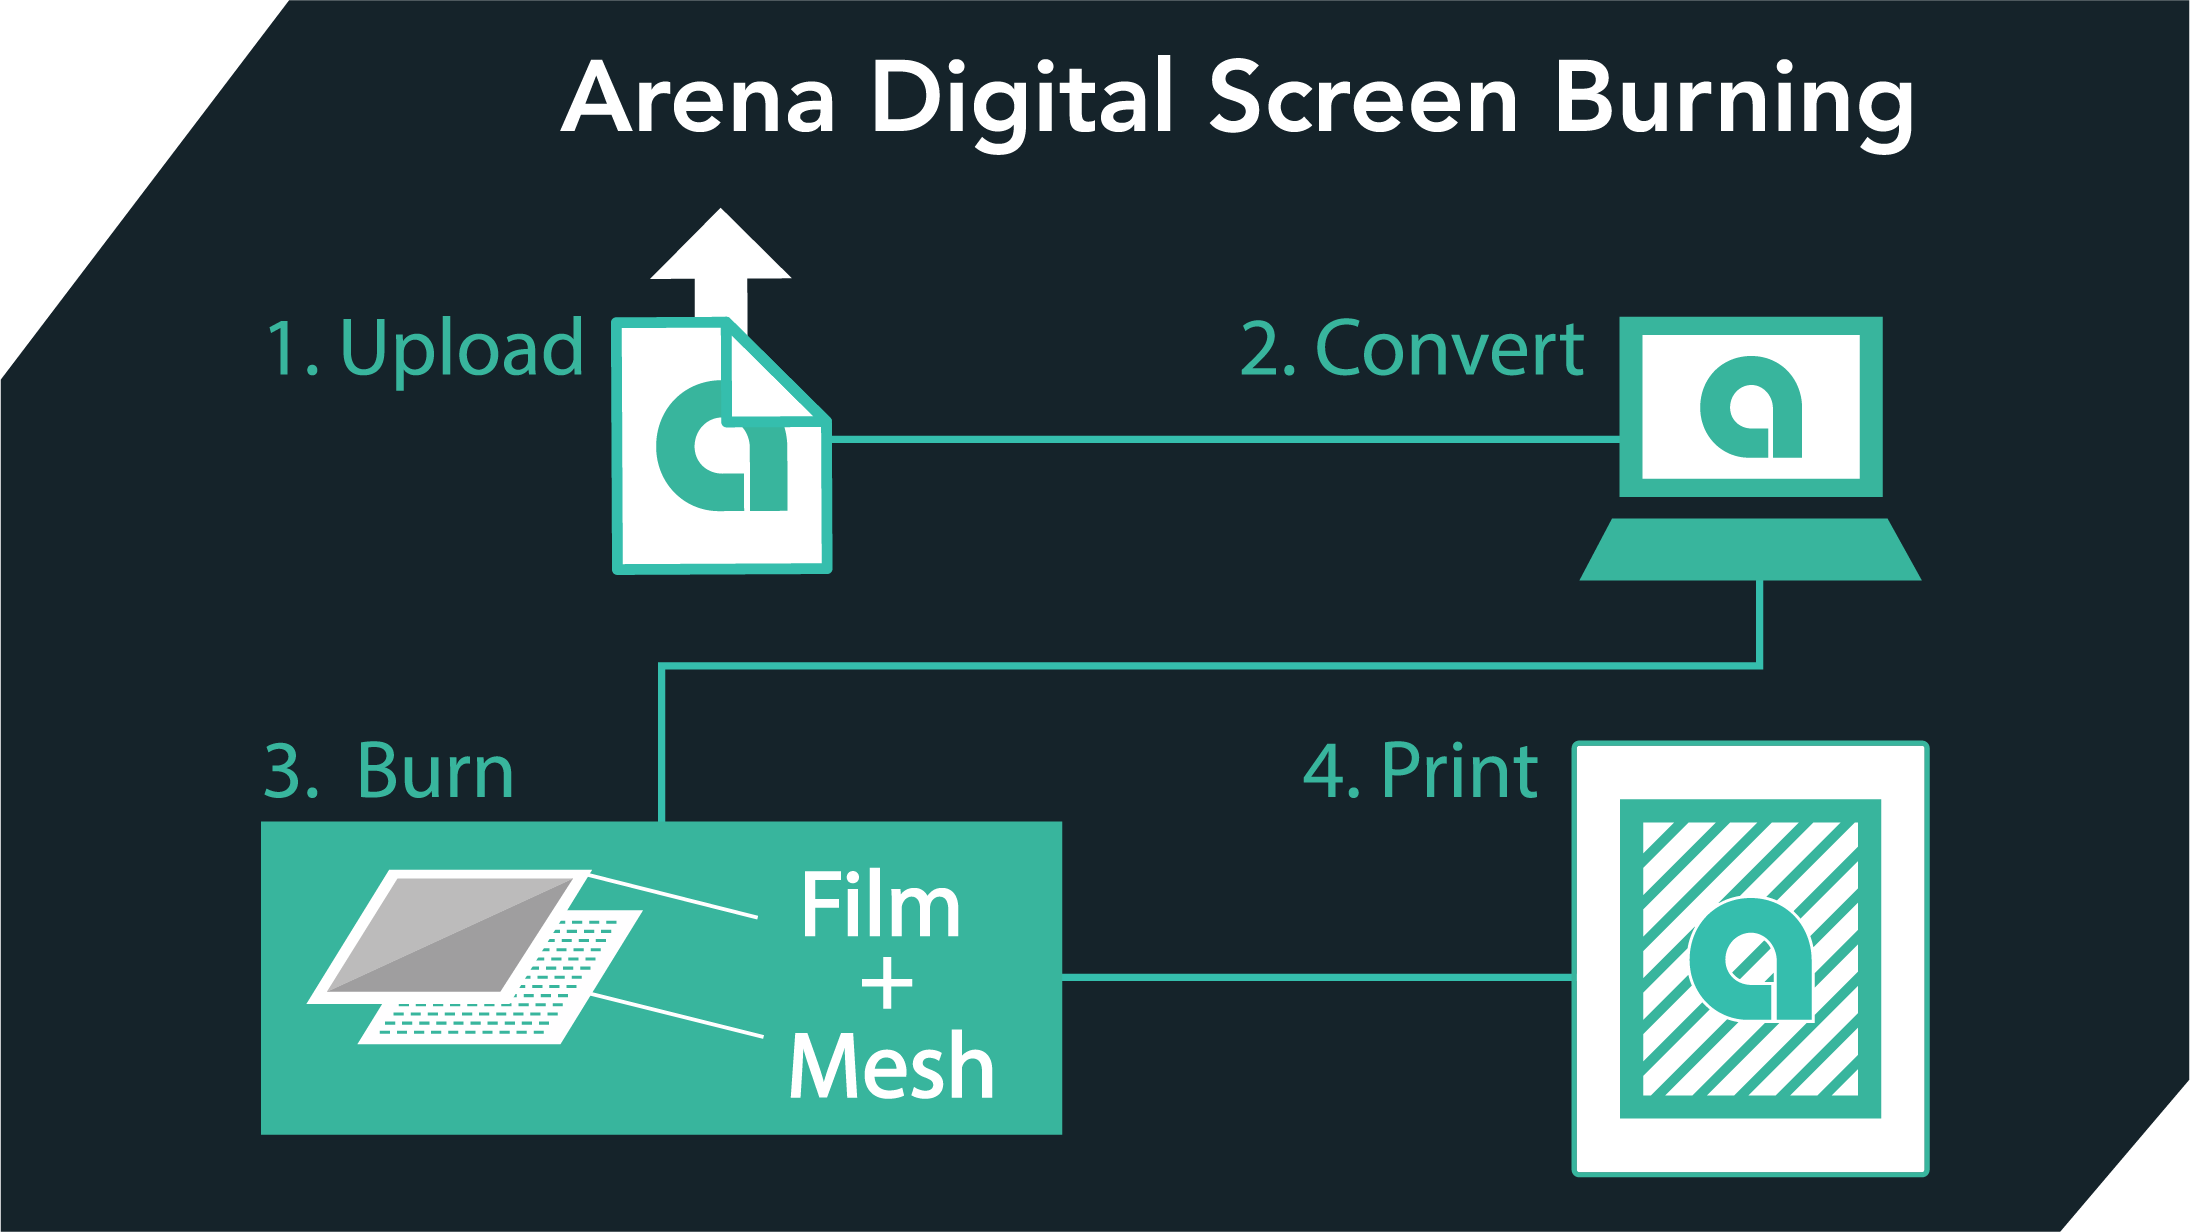 Arena Prints Screen Burning Services and Pre-Burned Screens